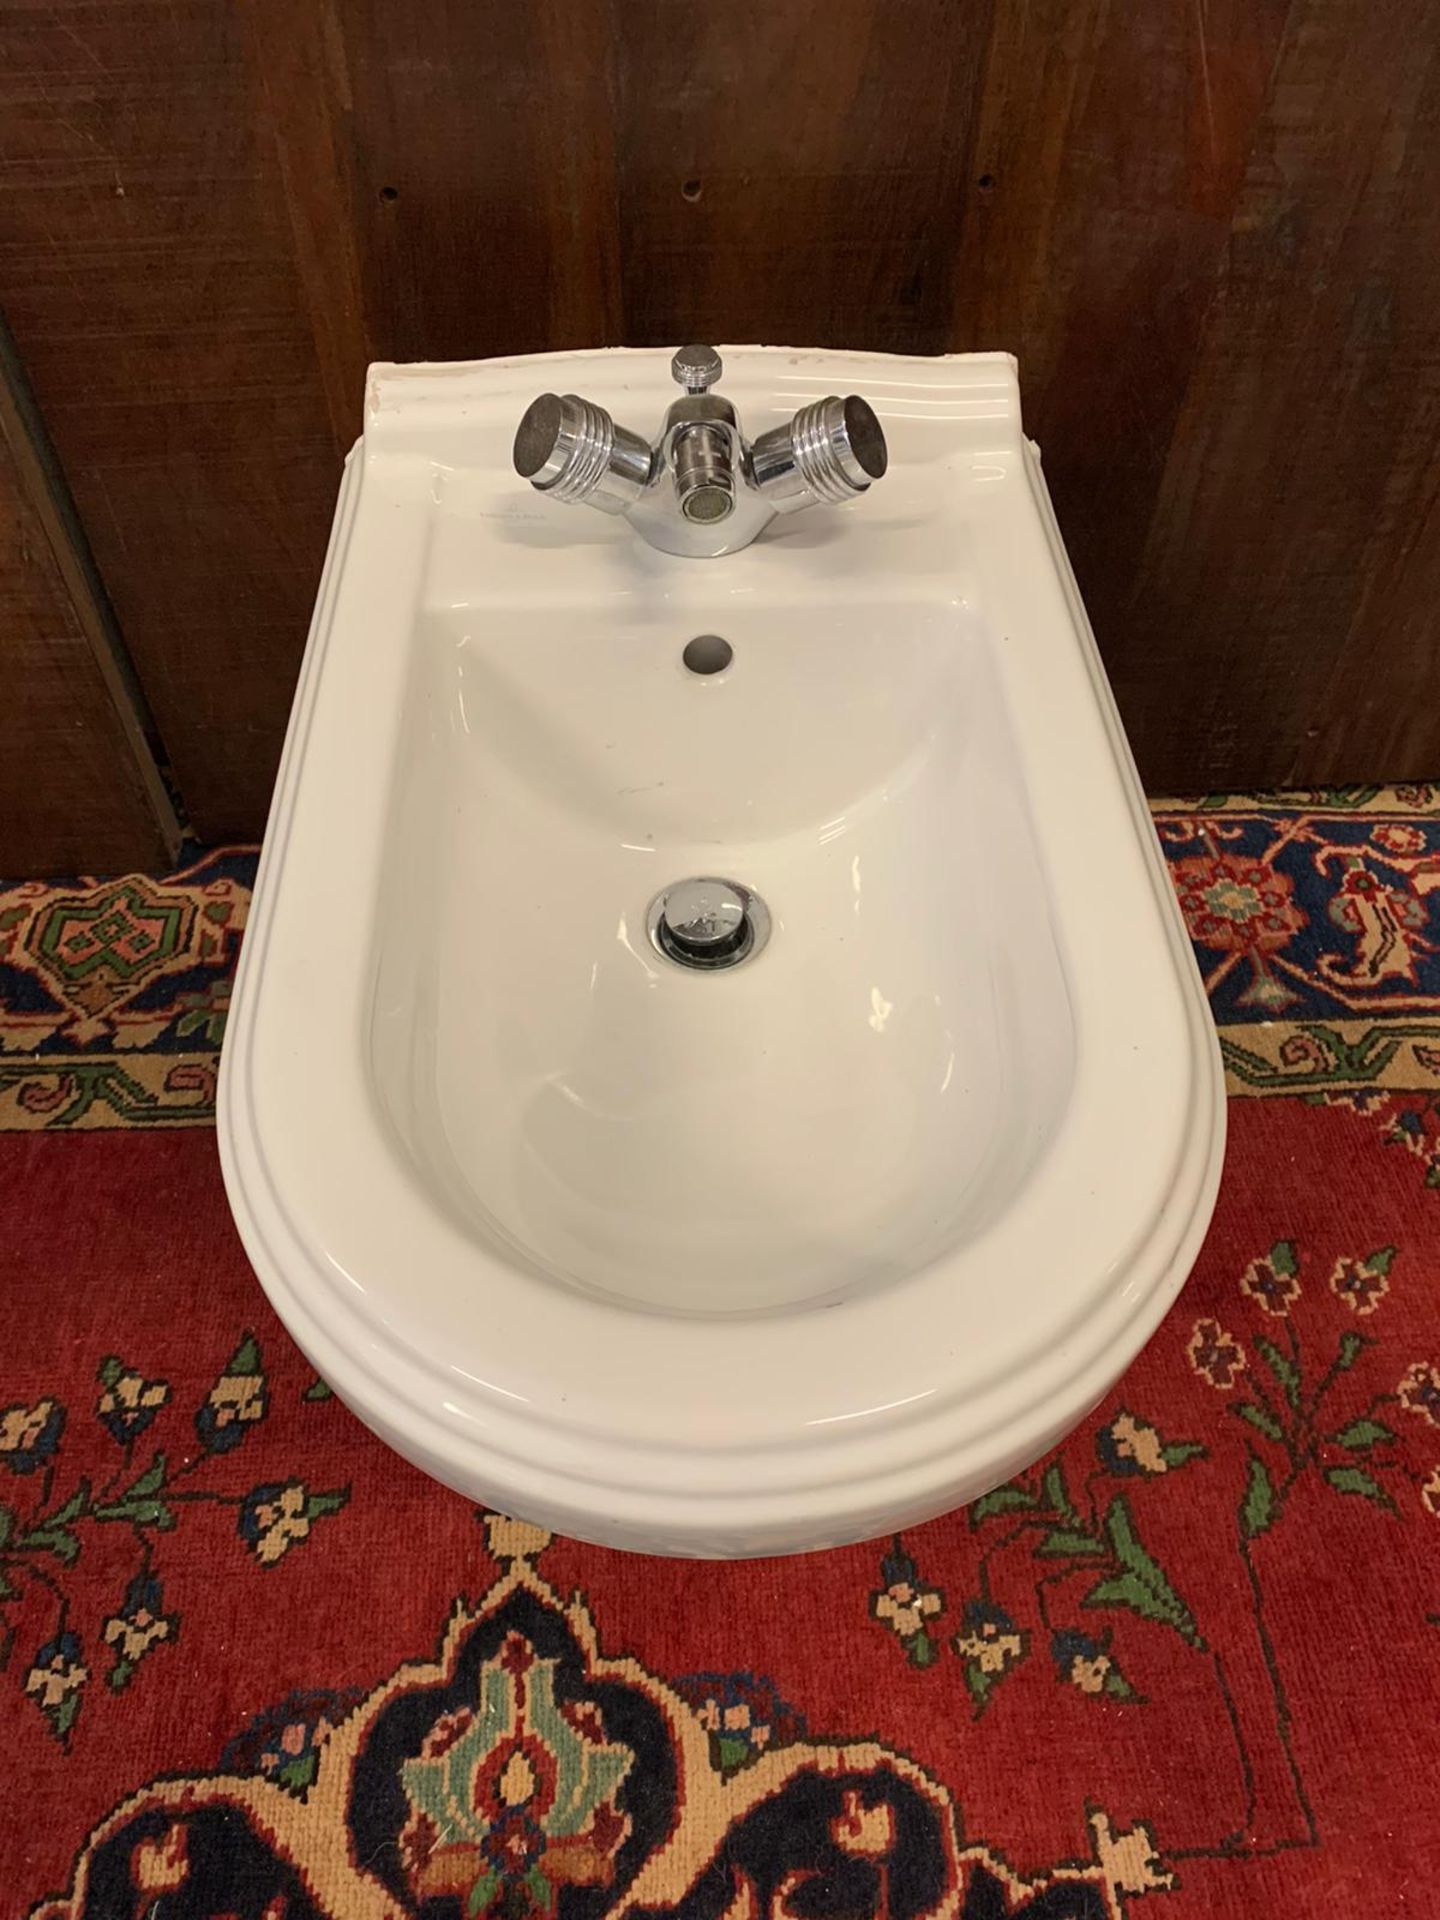 VILLEROY & BOCH BIDET BASIN WITH CHROME CYLINDER LUXURY FAUCET TAPS BY JEAN-CLAUDE DELEPINE - Image 2 of 4